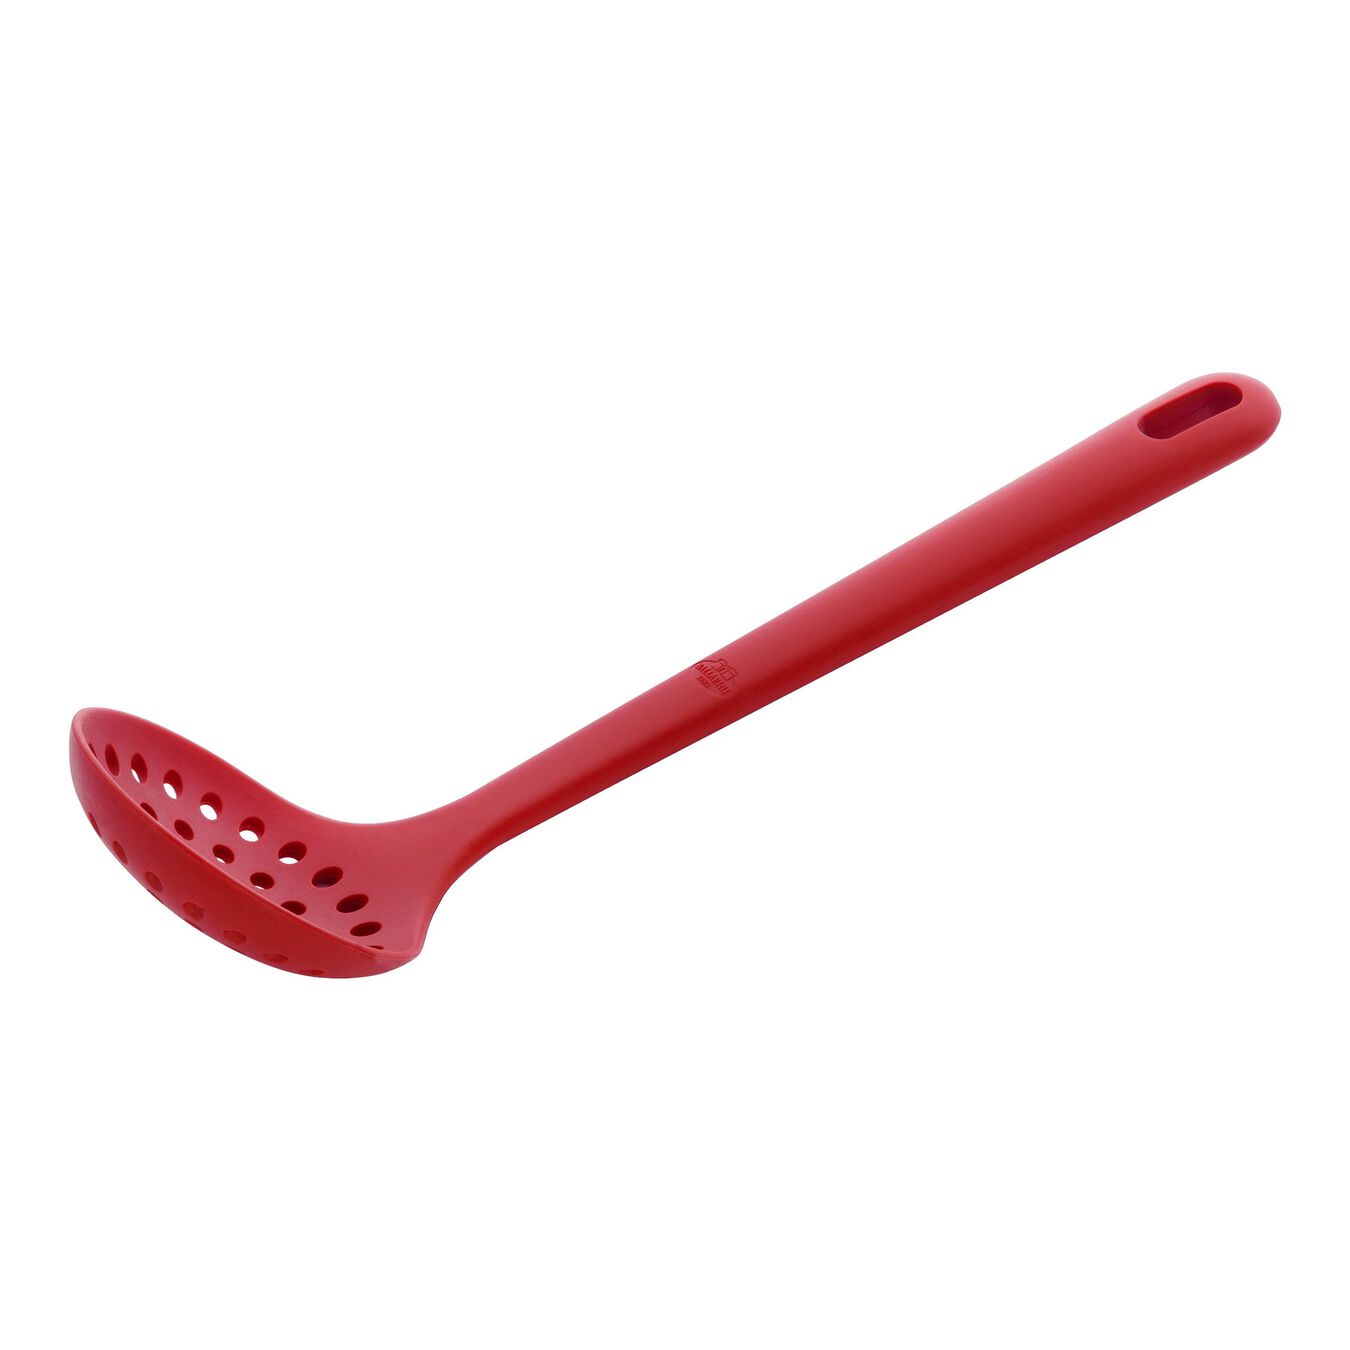 31 cm silicone Skimming ladle, red,,large 1